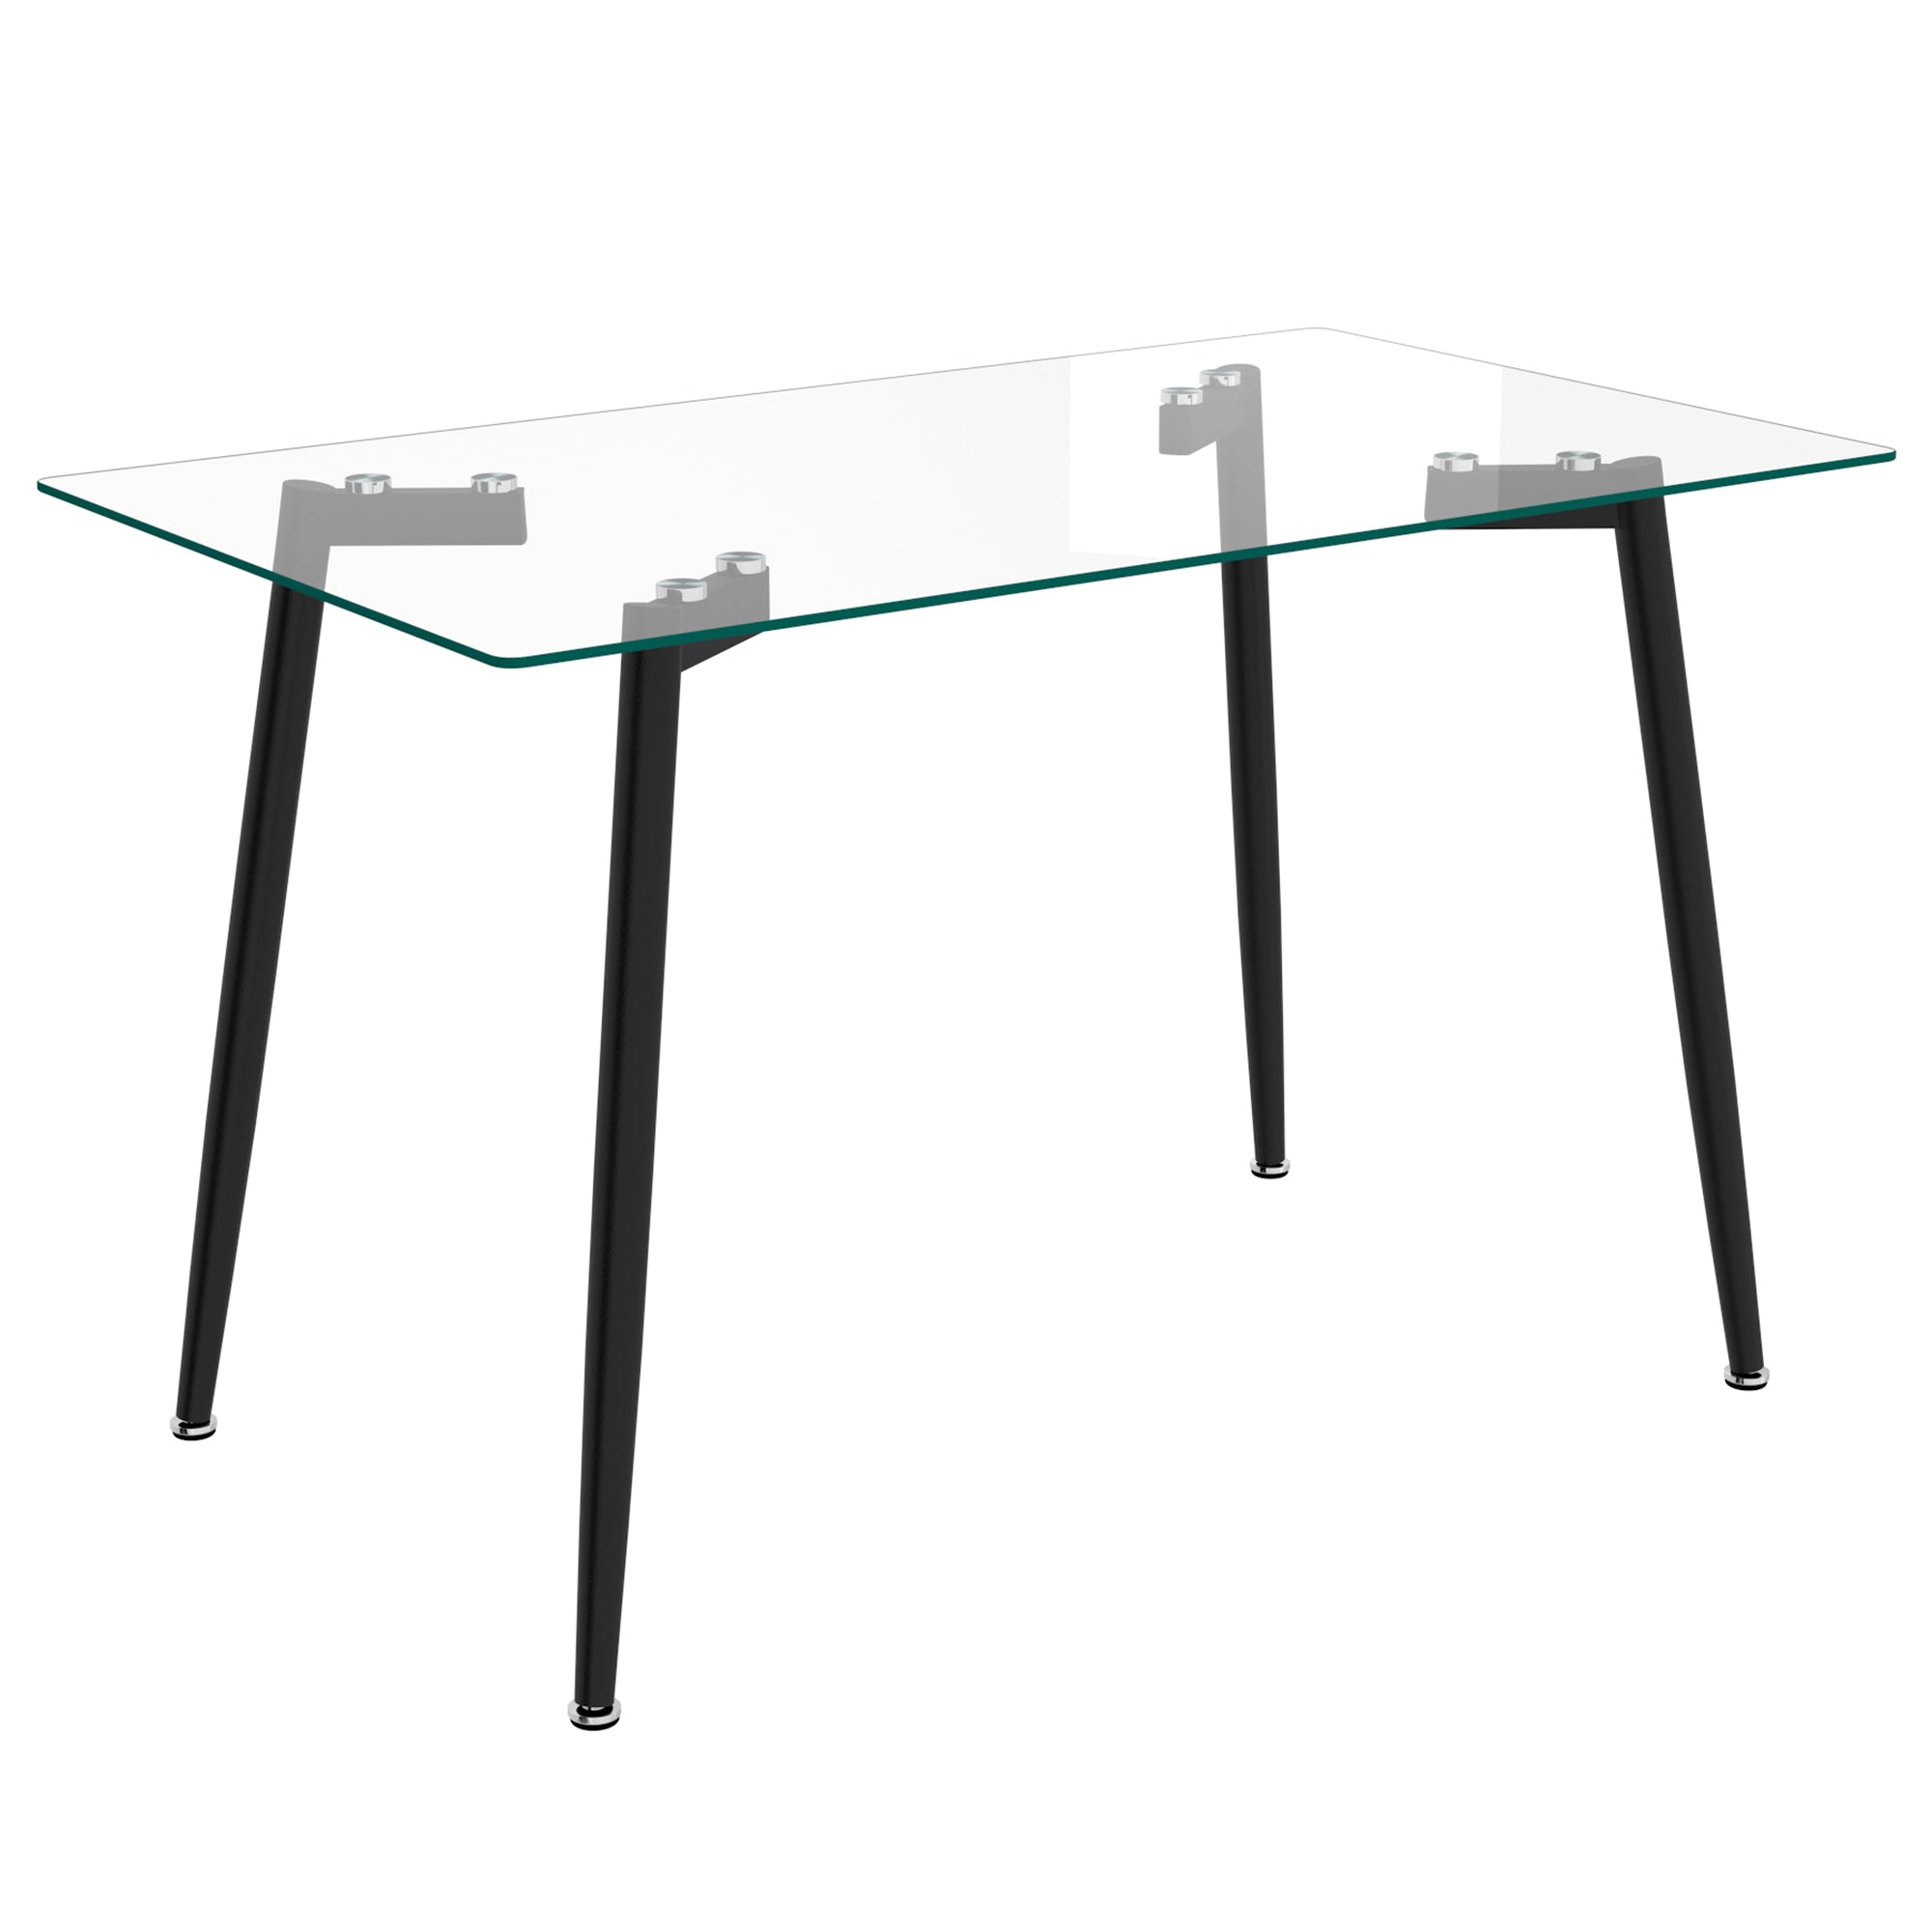 ABBOT- 48" DINING TABLE-CLEAR GLASS / BLACK